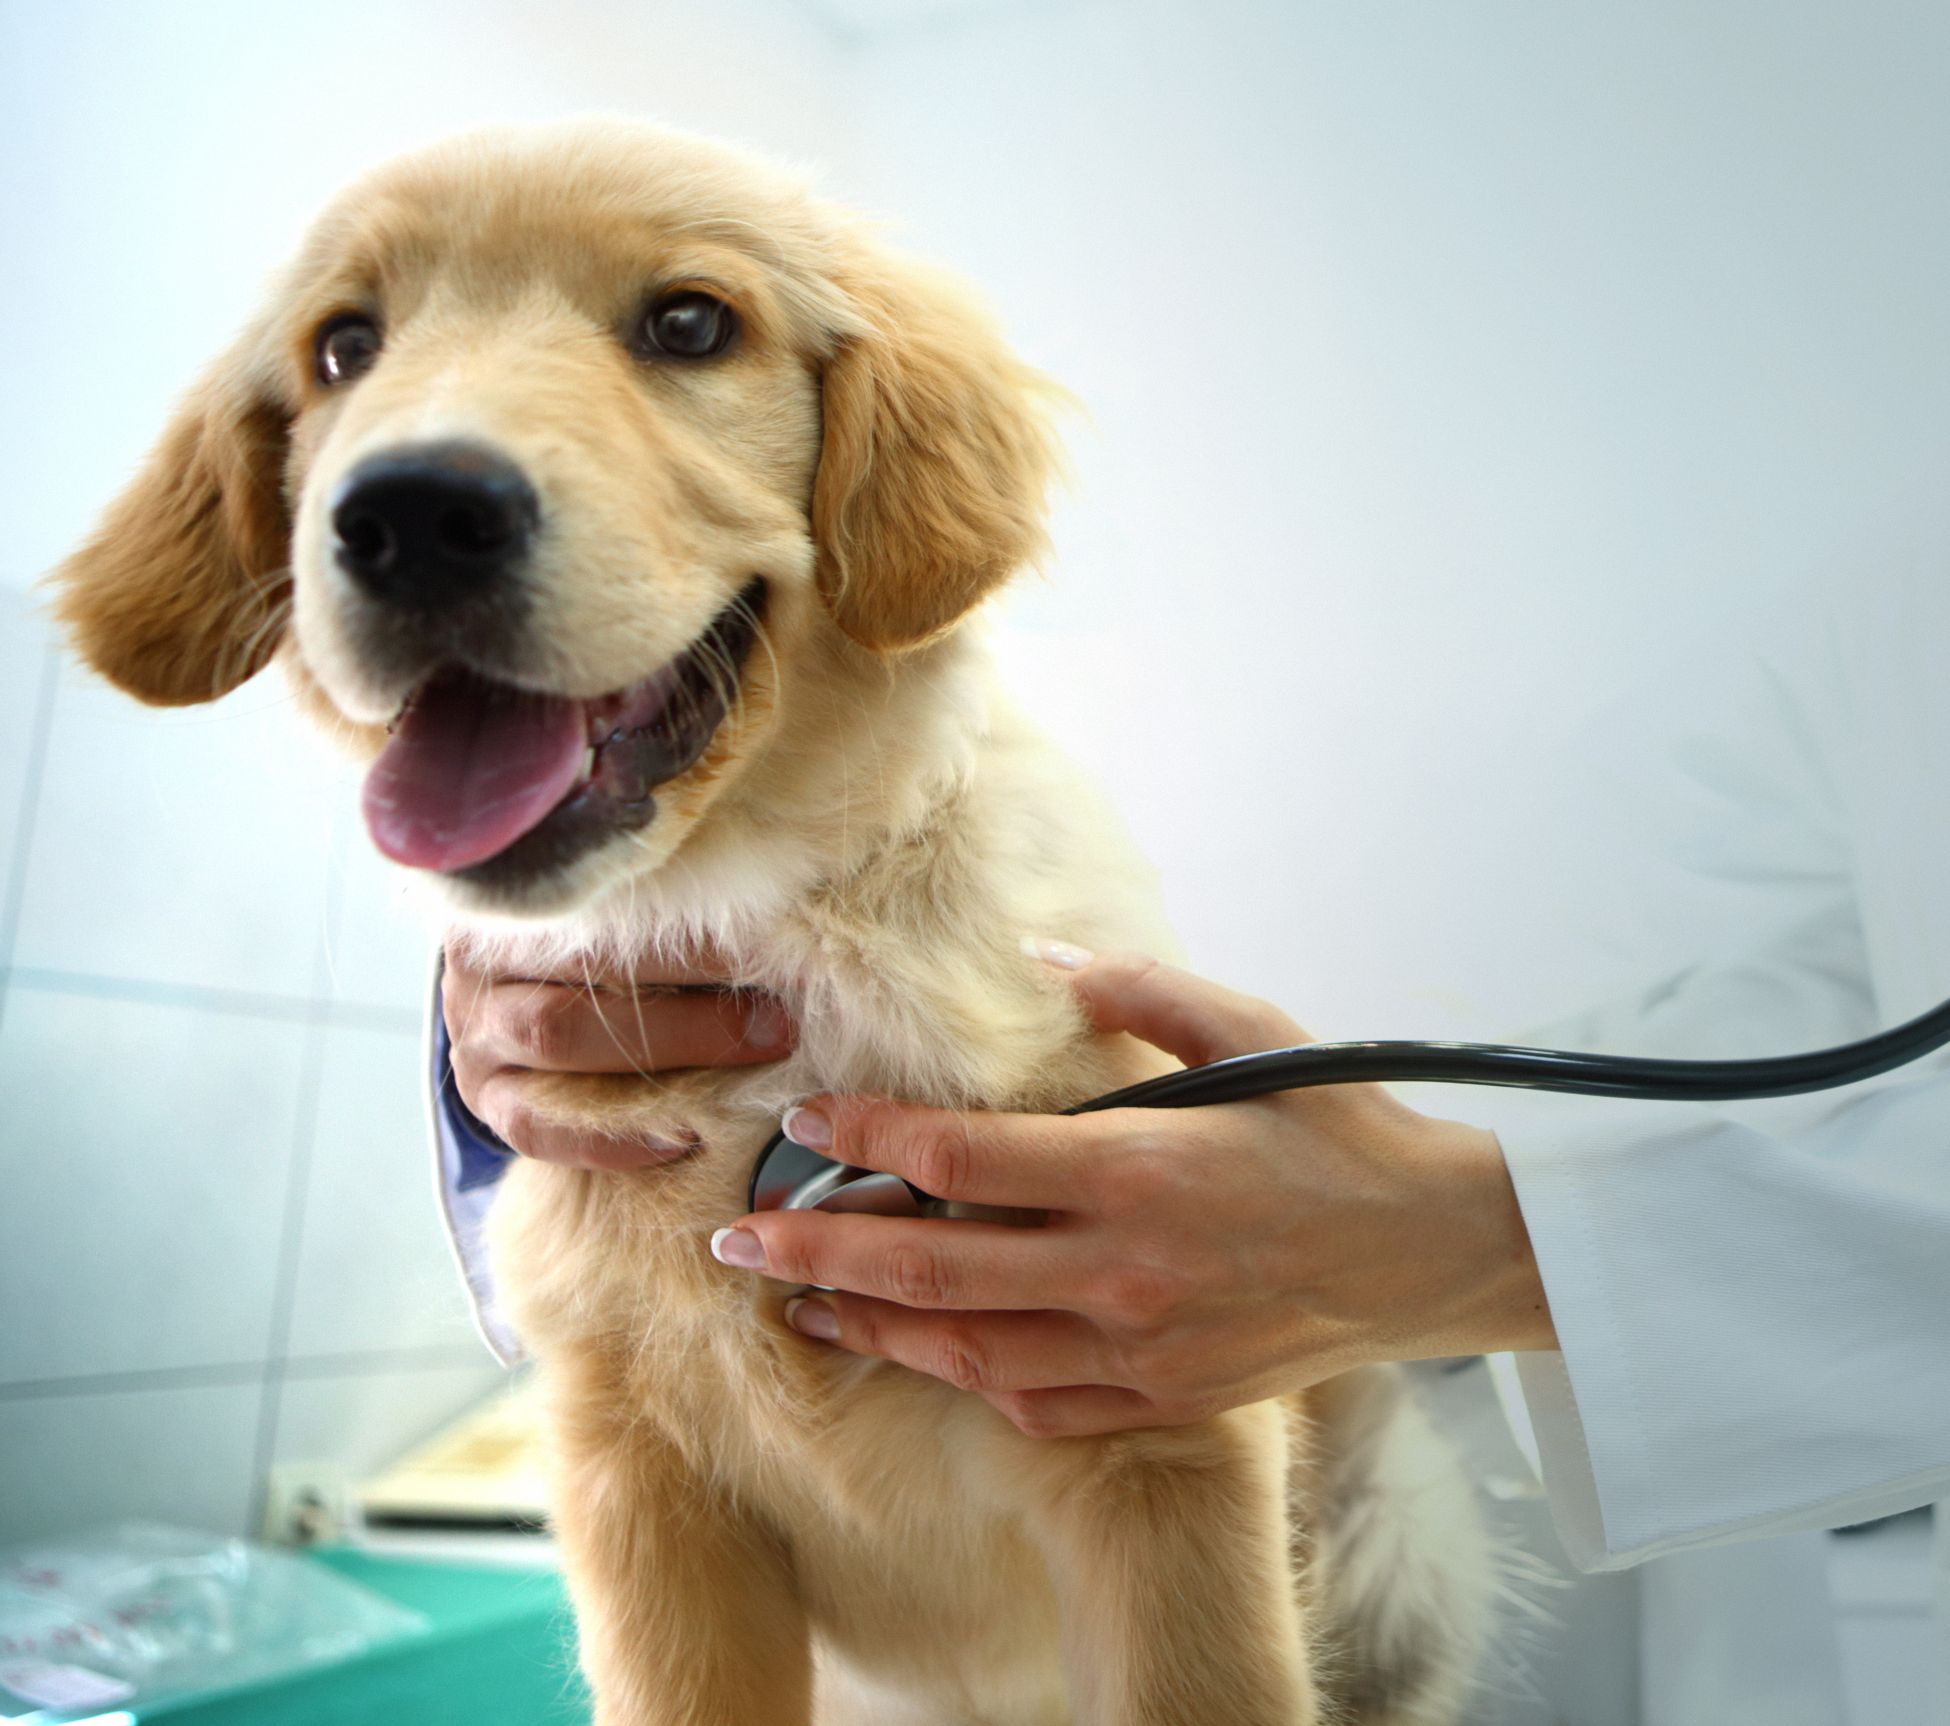 Preparing Your Pet for Their First Veterinary Visit: Tips for a Positive Experience